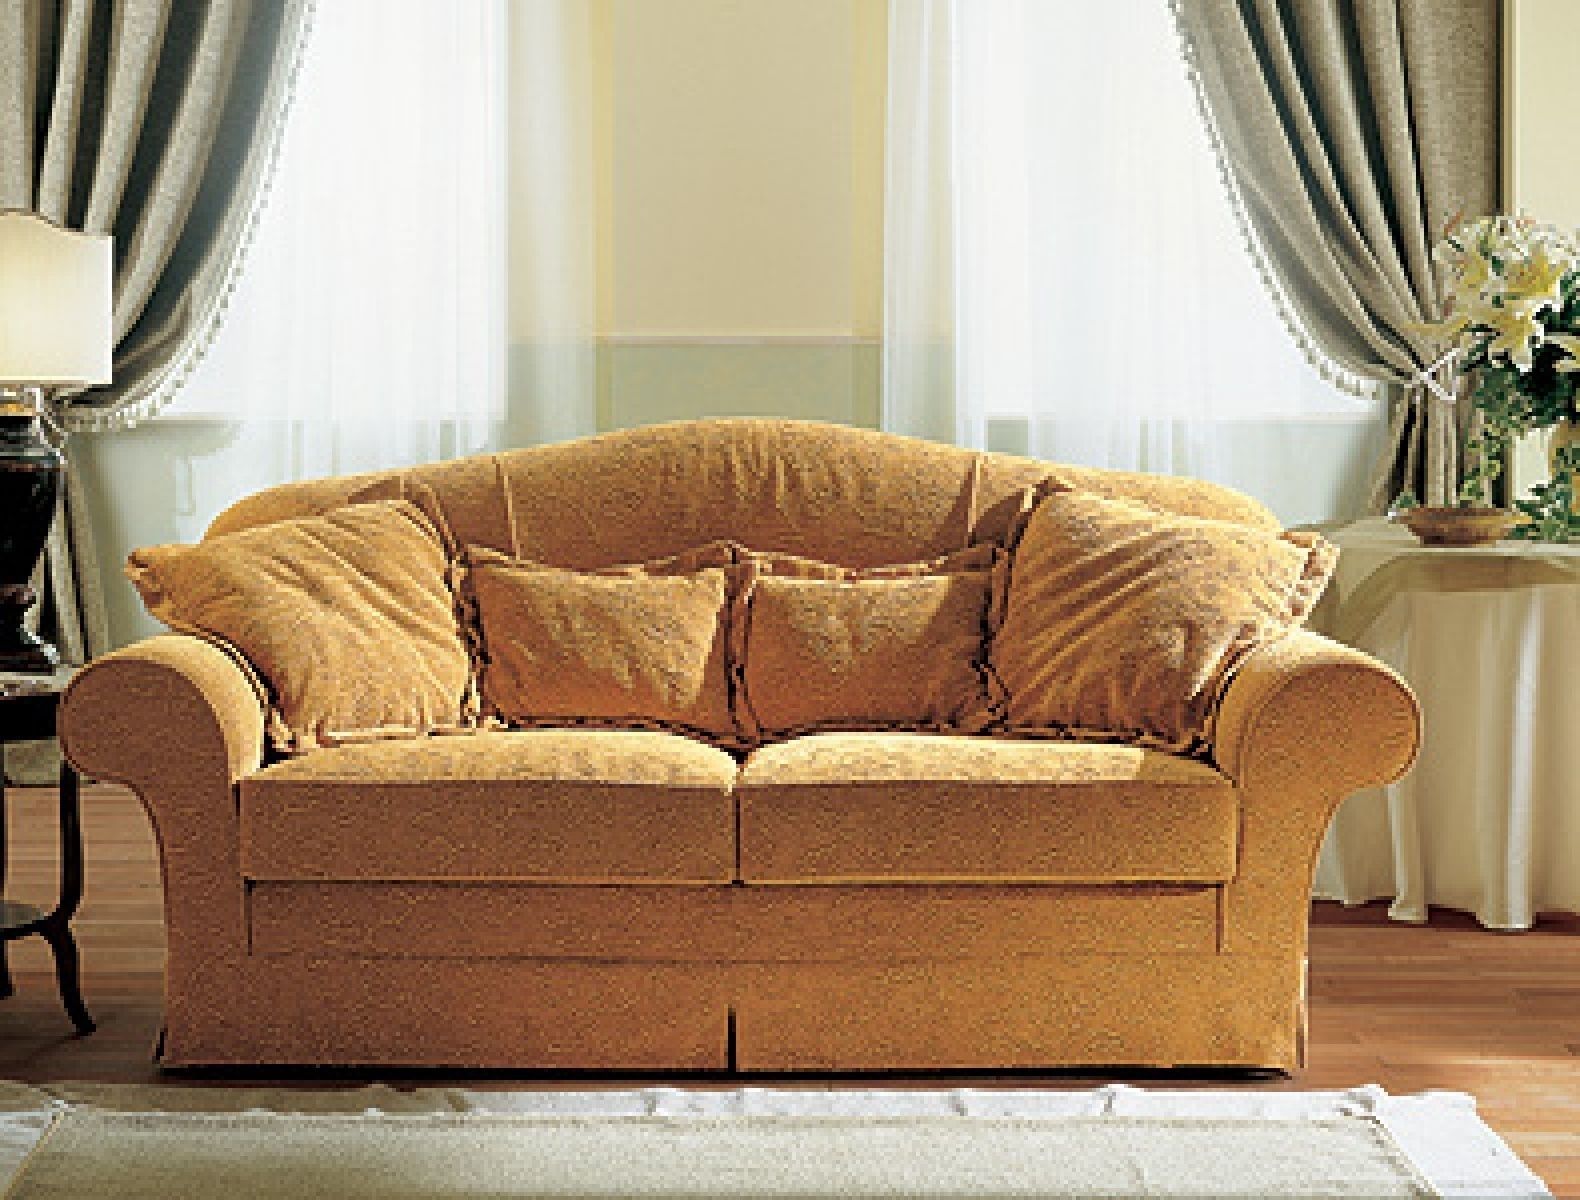 Elegant Traditional Sofas 70 For Your Office Sofa Ideas With Within Traditional Sofas (View 6 of 10)